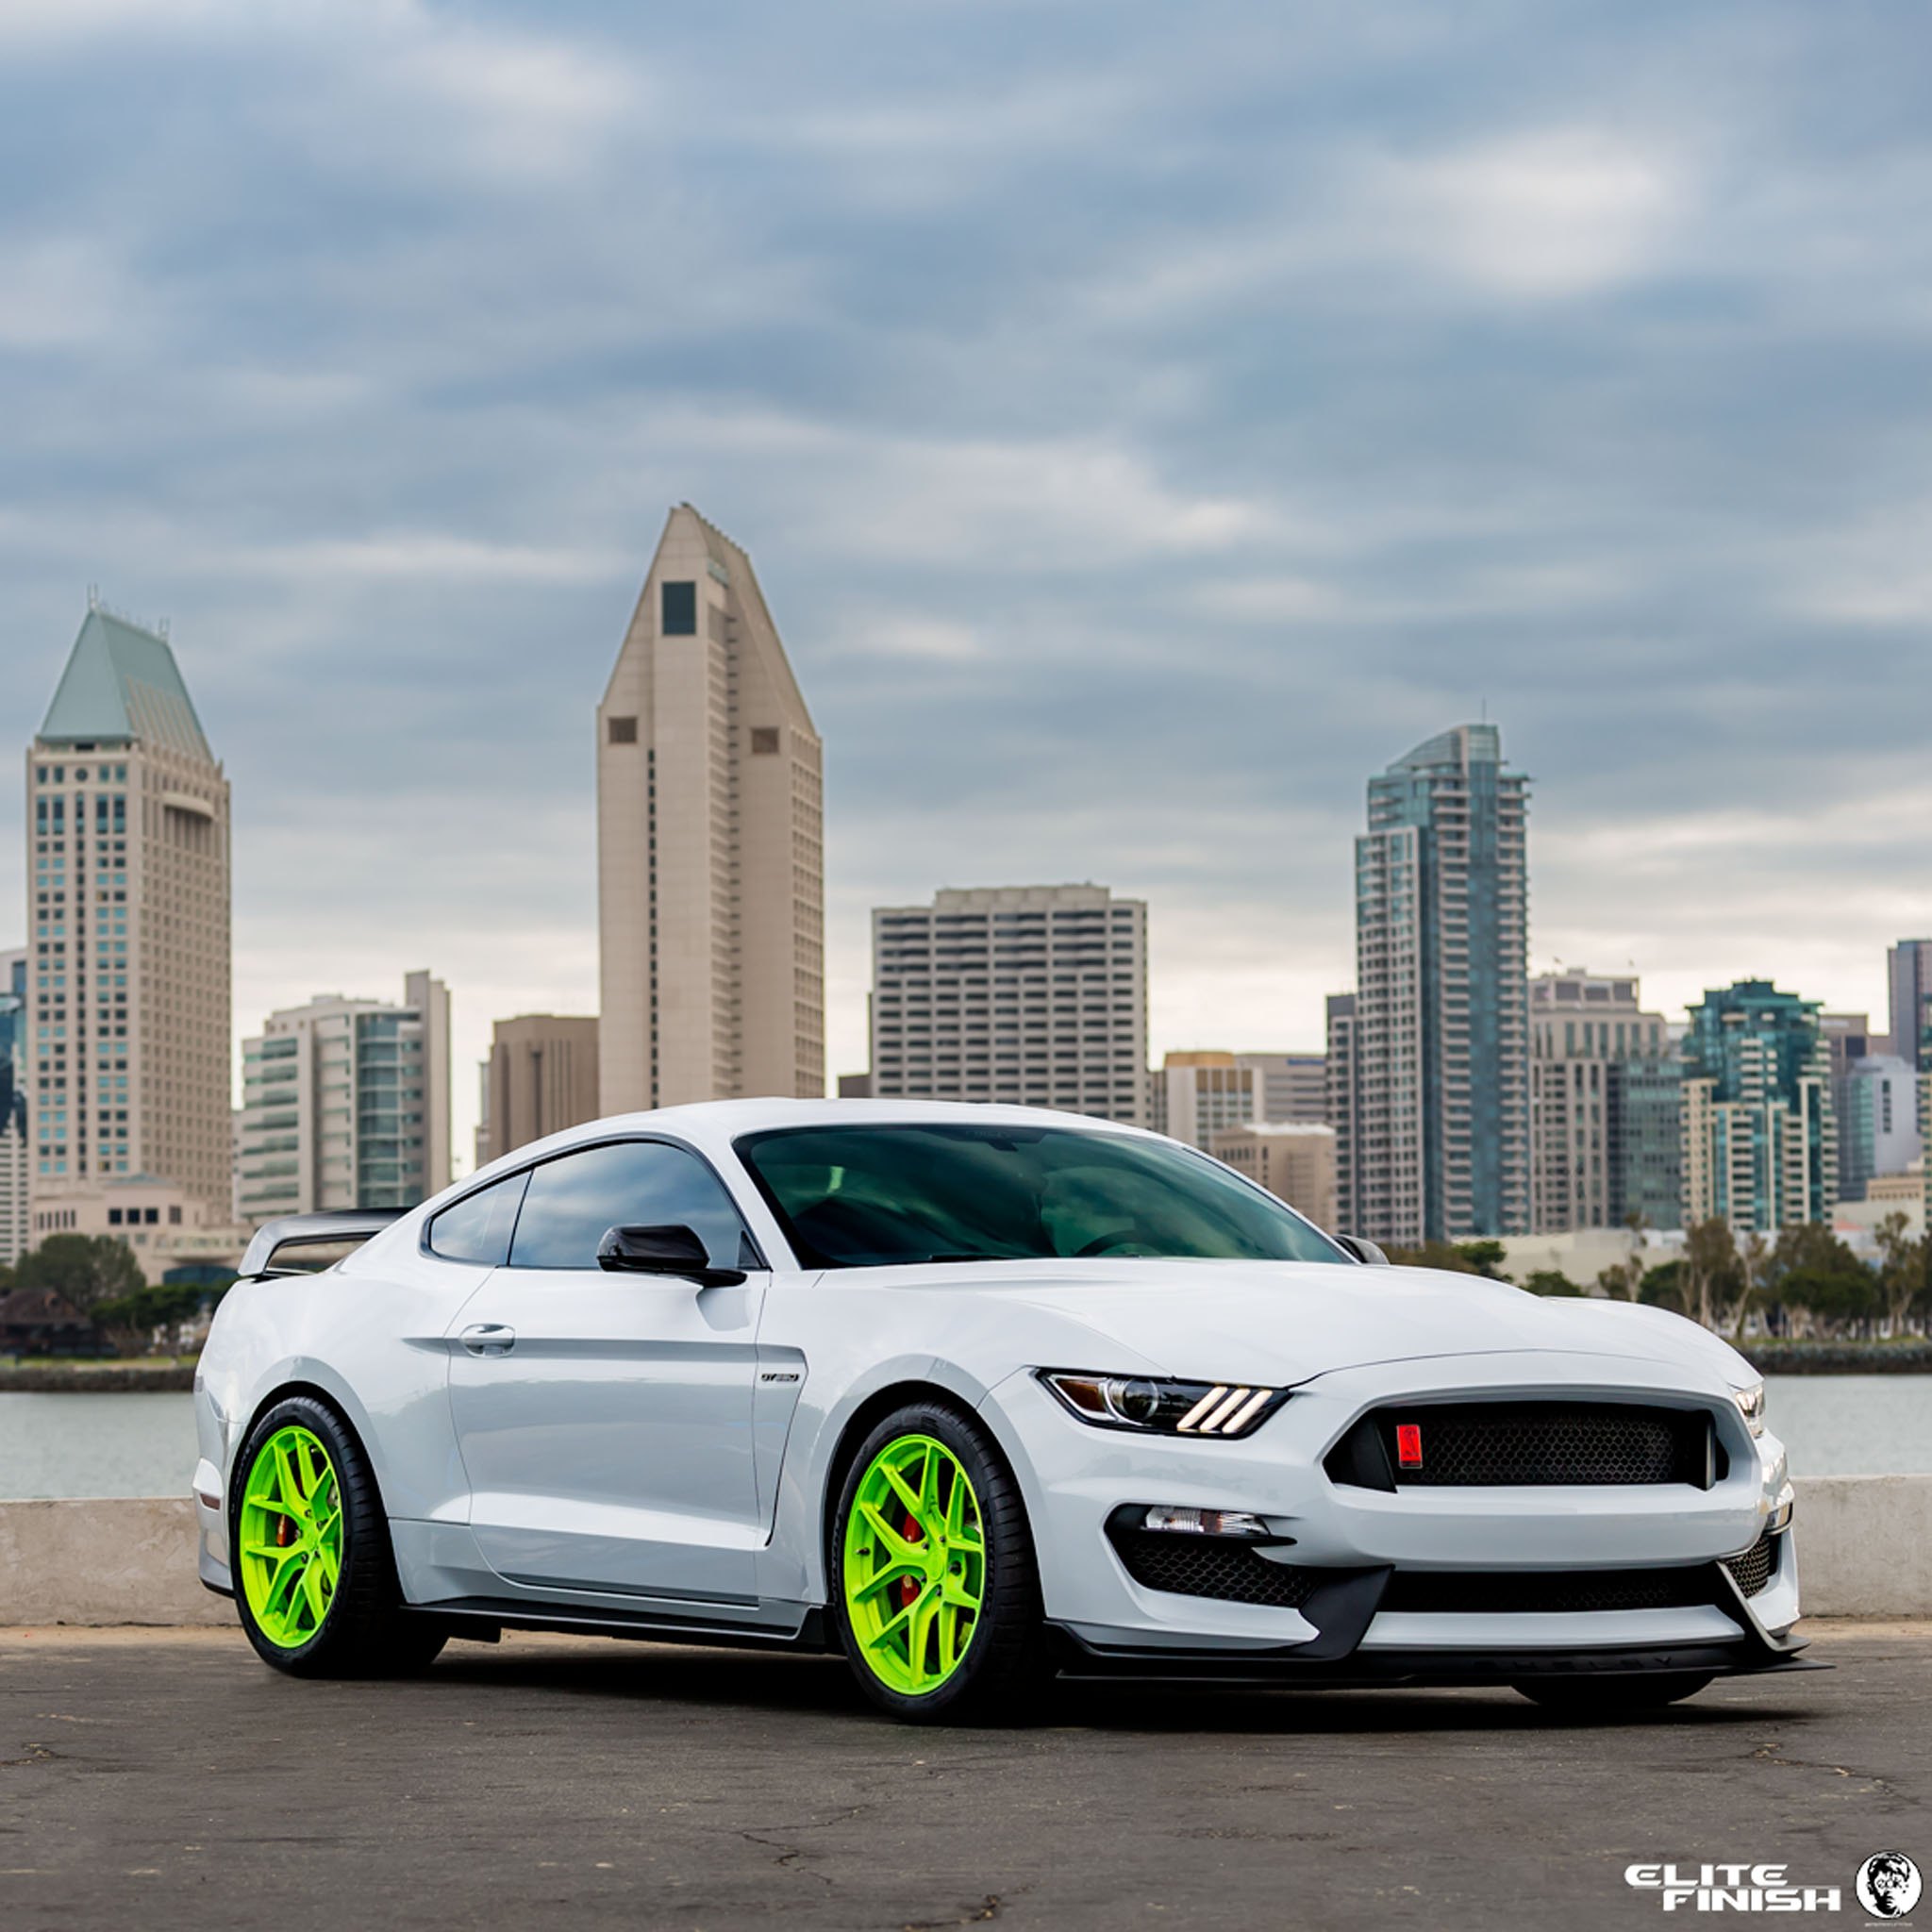 Aftermarket Side Skirts on White Ford Mustang Shelby - Photo by HRE Wheels